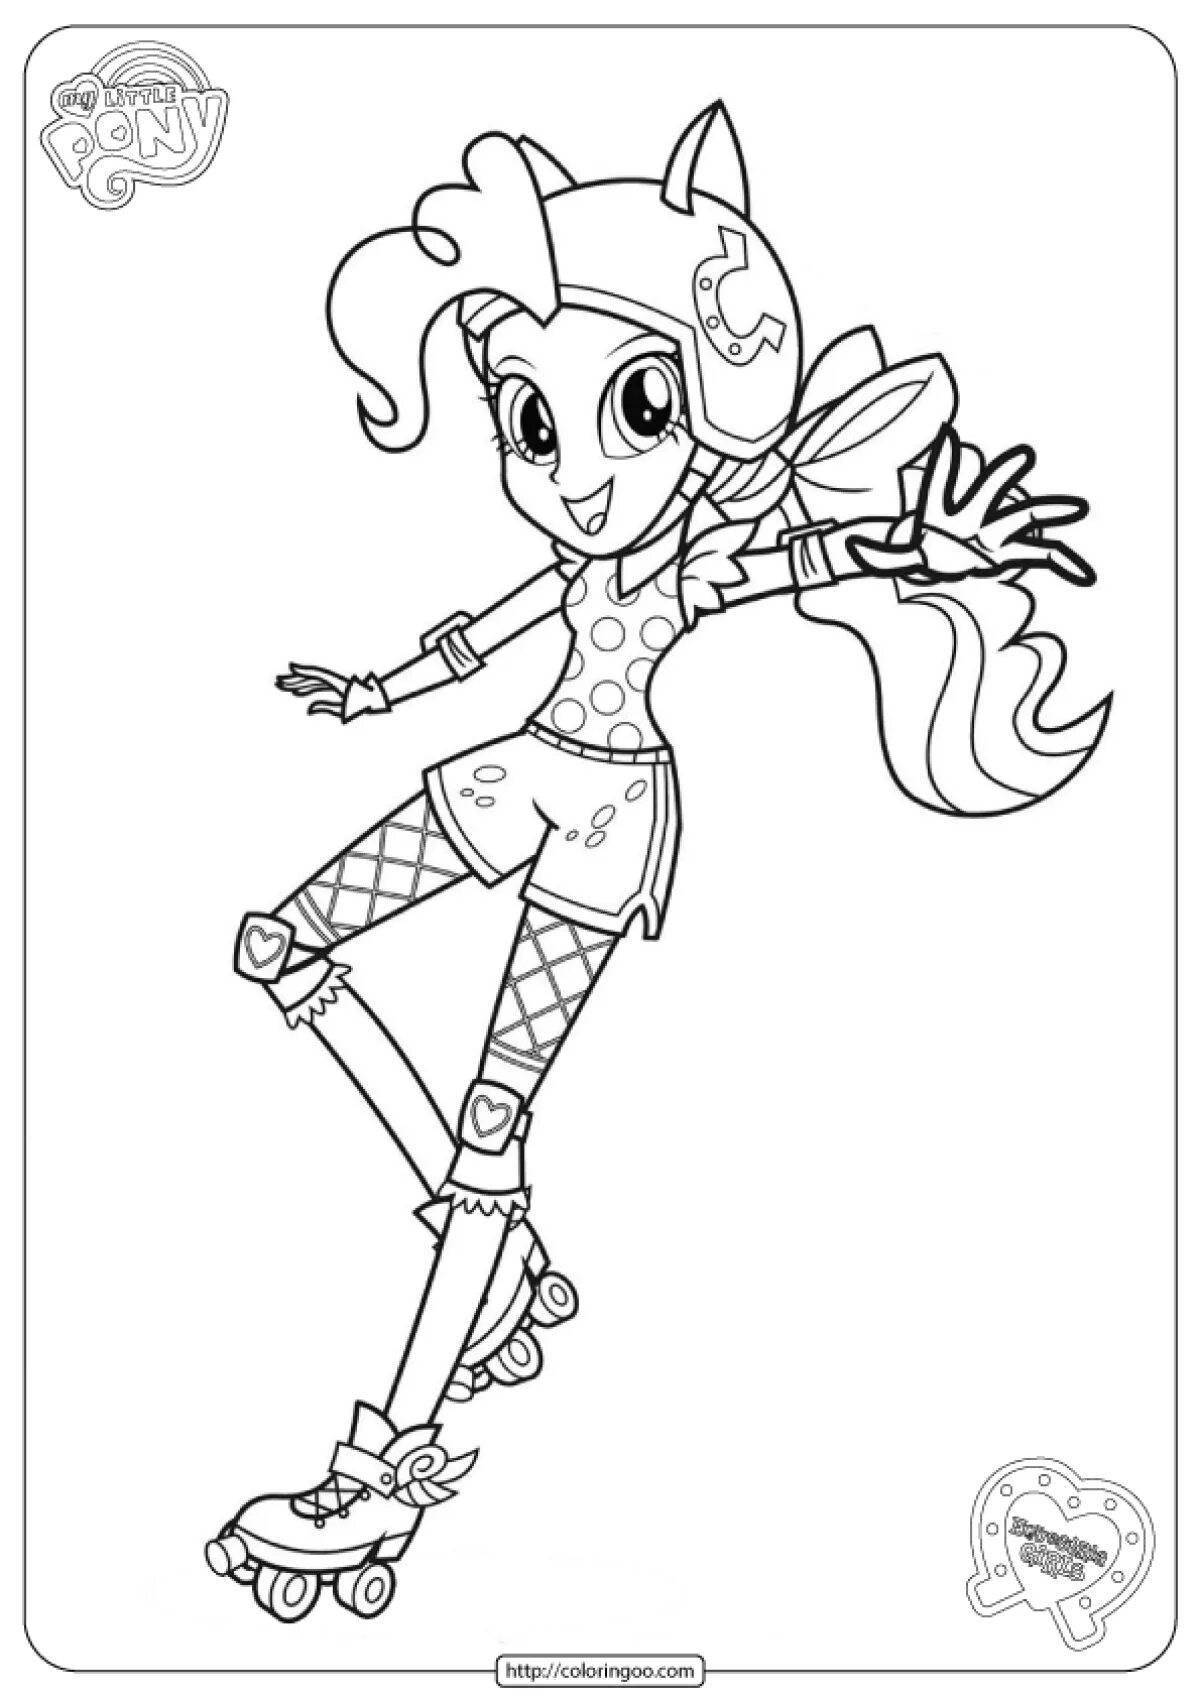 Coloring page bright pony doll